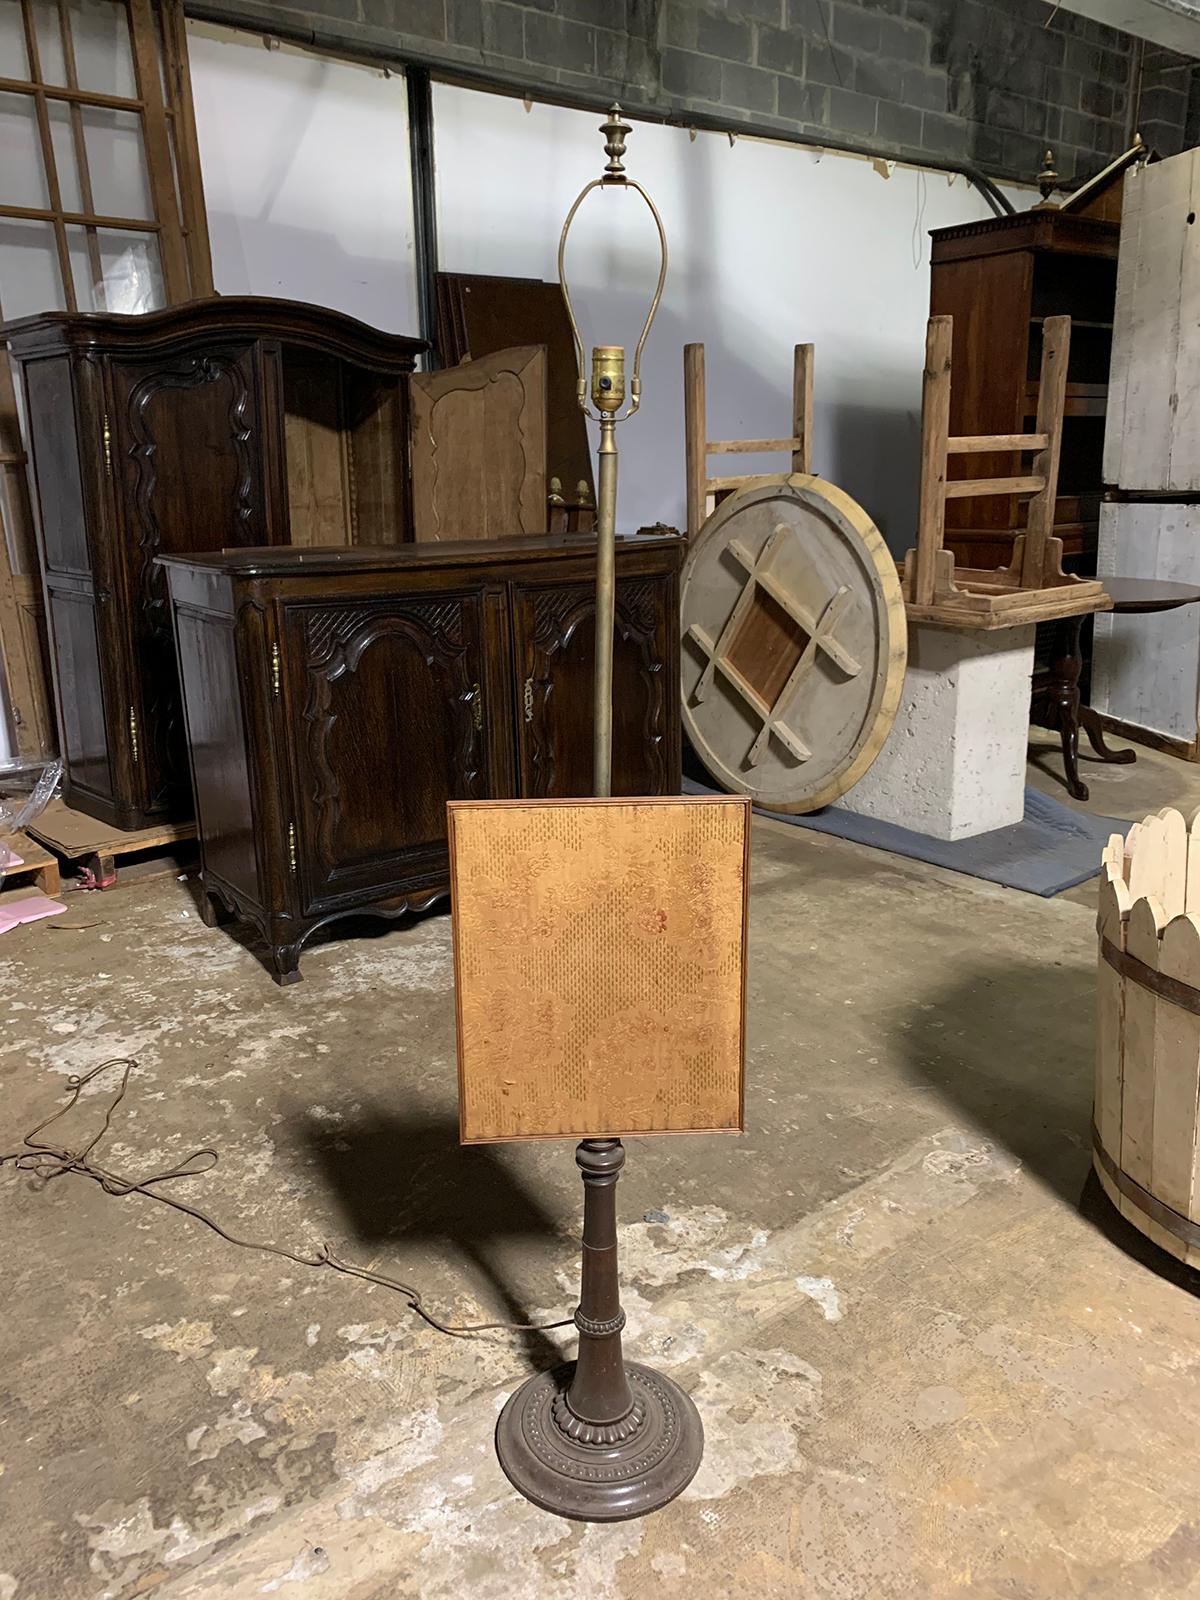 19th century Regency style metal fire pole with fabric screen as floor lamp
height listed is without the harp
French wired.